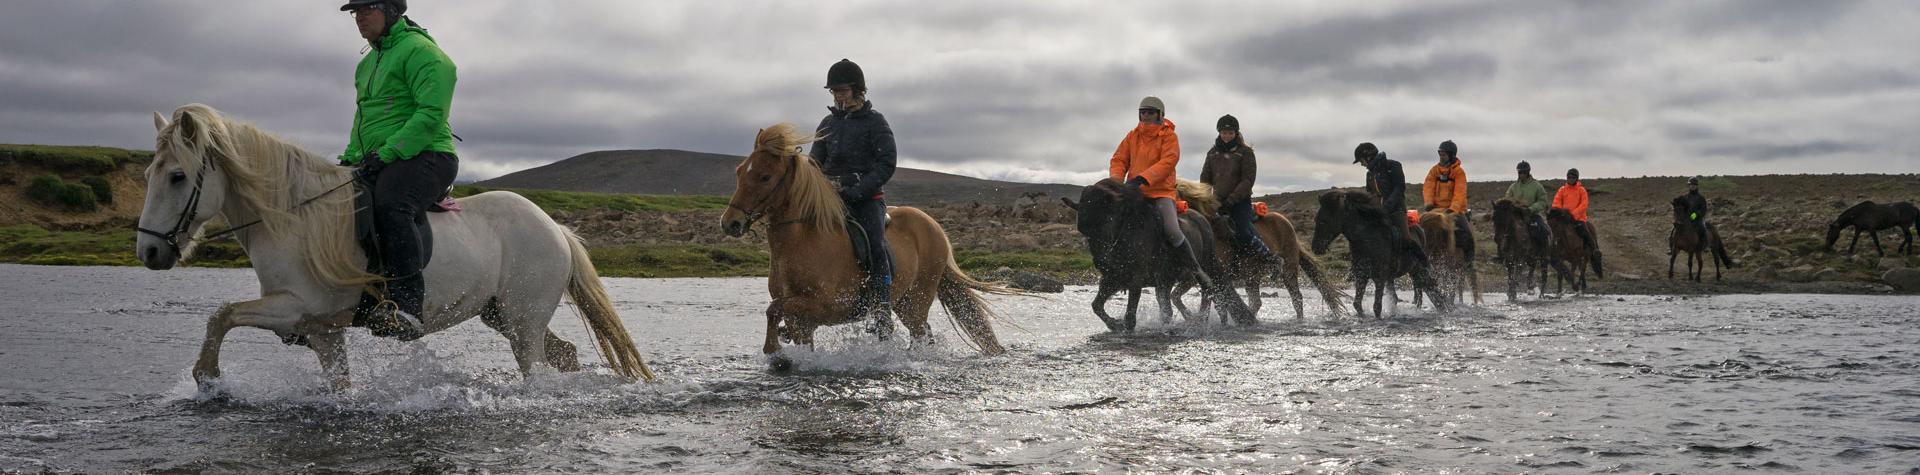 Horse riding in Iceland.